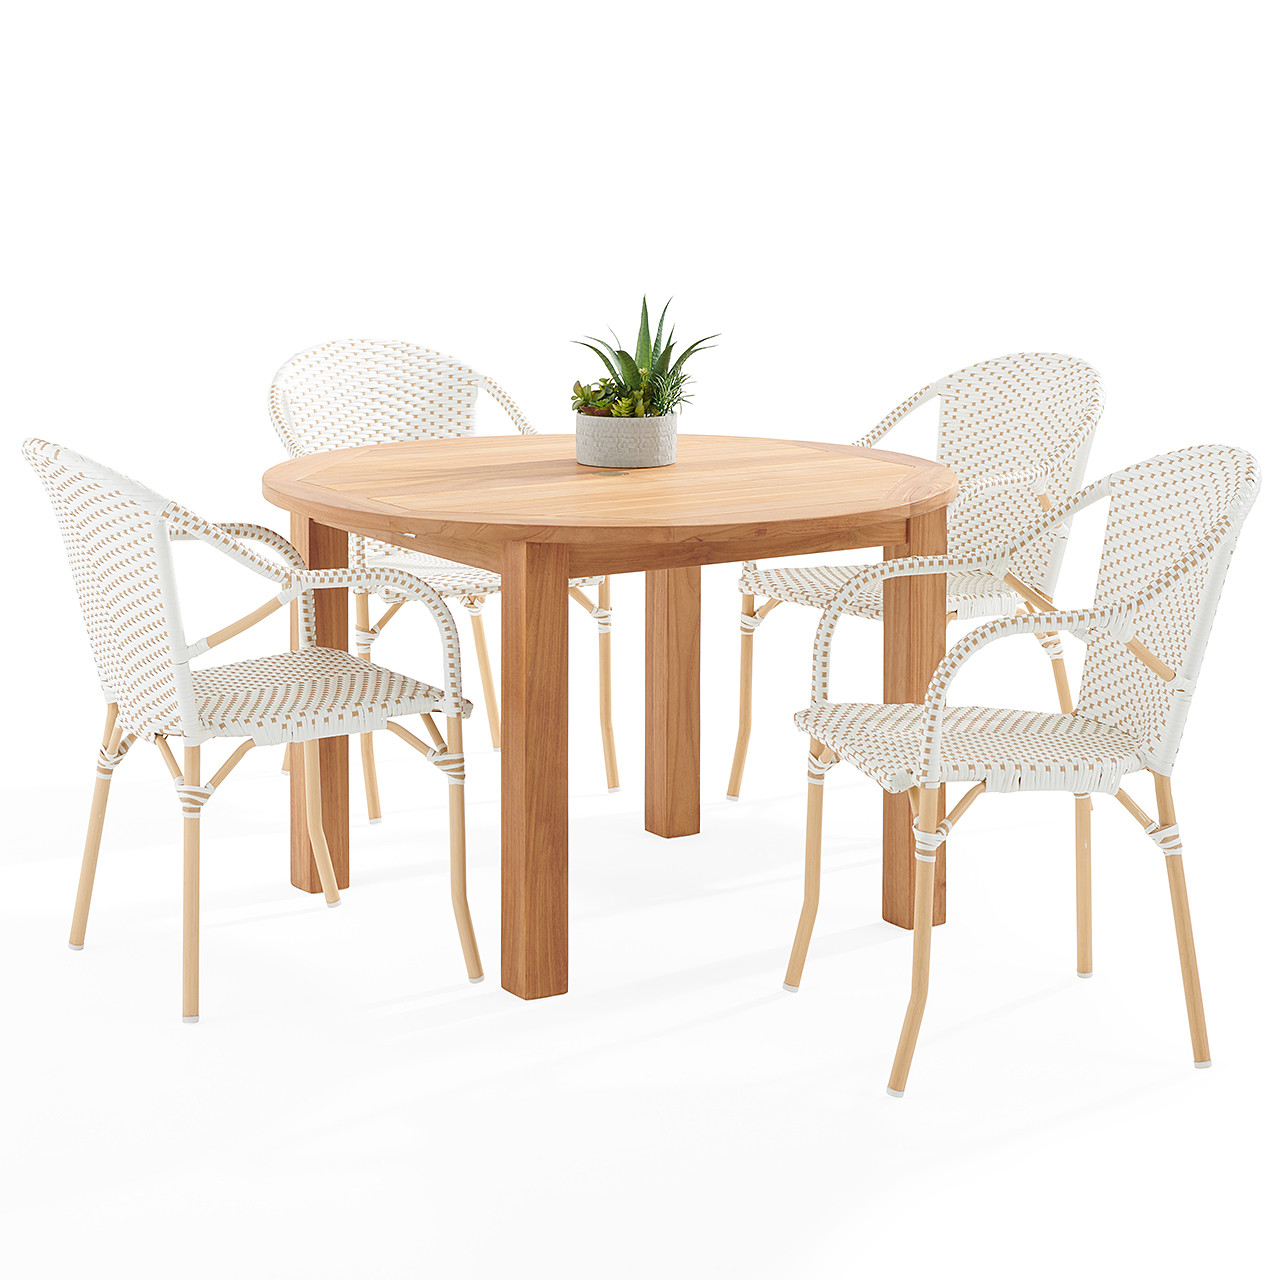 Parisian Cafe Cane Aluminum with Maple and White Outdoor Wicker 5 Piece Arm Dining Set + 48 in. D Teak Table